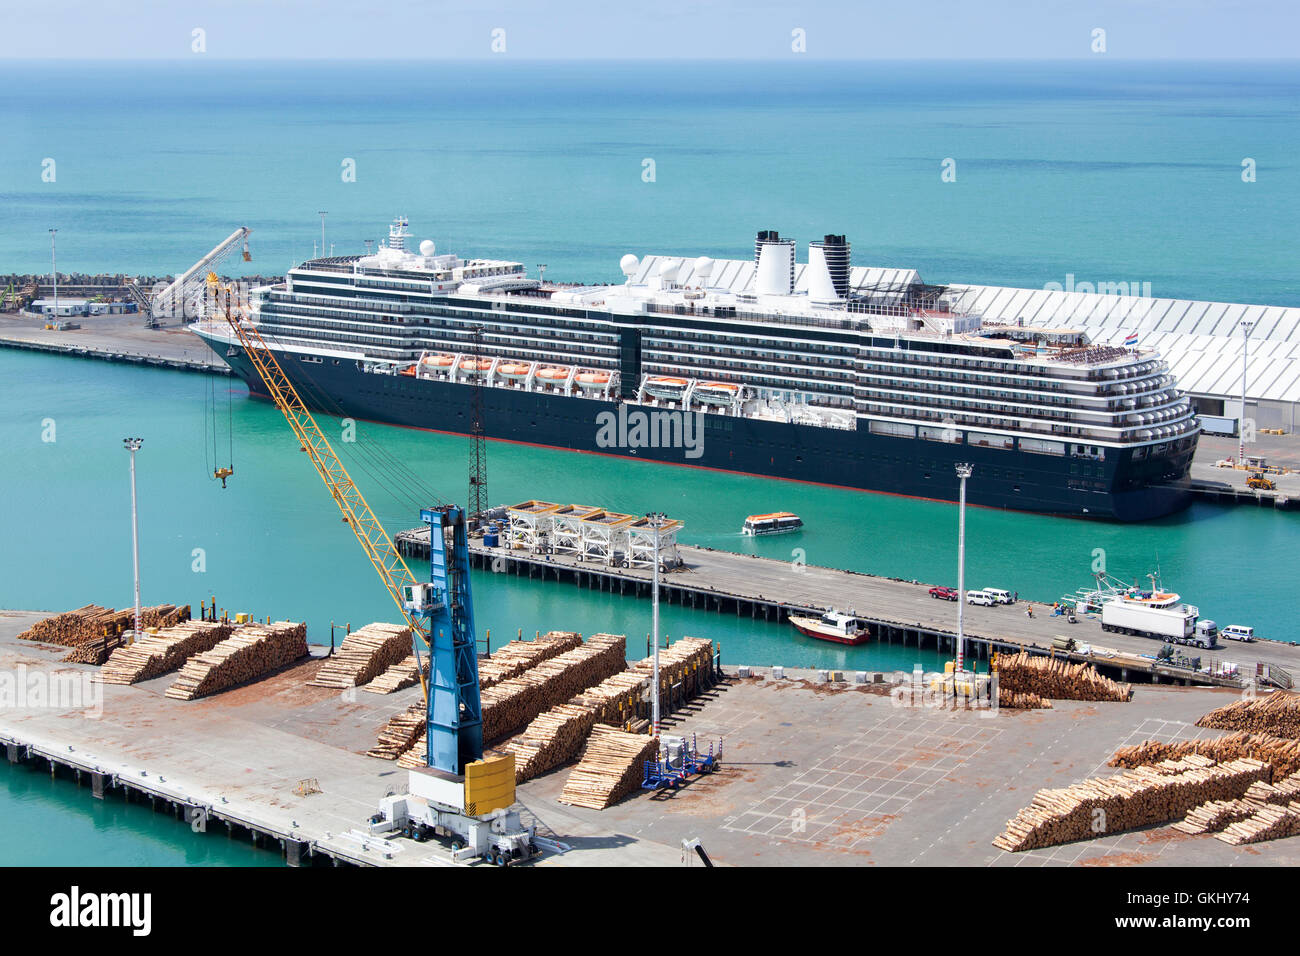 The cruise ship docked in the port of Napier town (New Zealand). Stock Photo